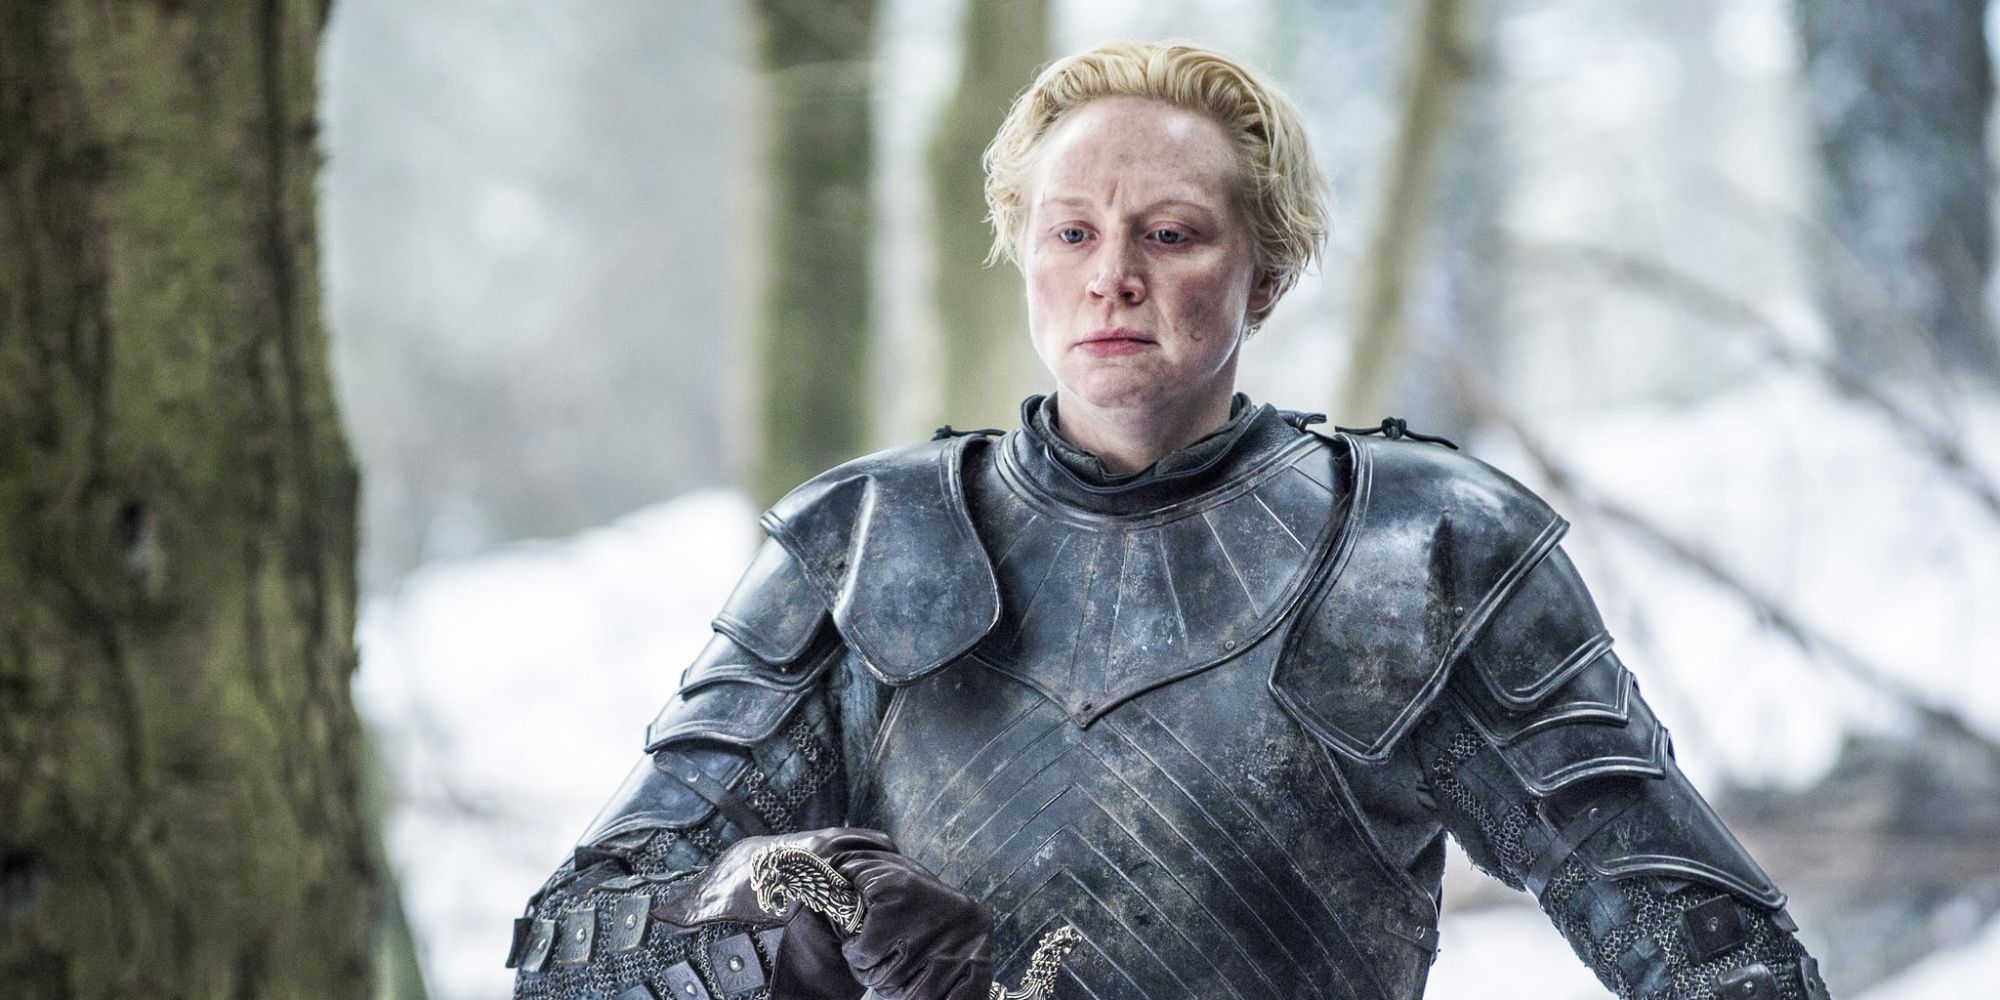 Game of Thrones' Brienne of Tarth wearing her armor in the forest